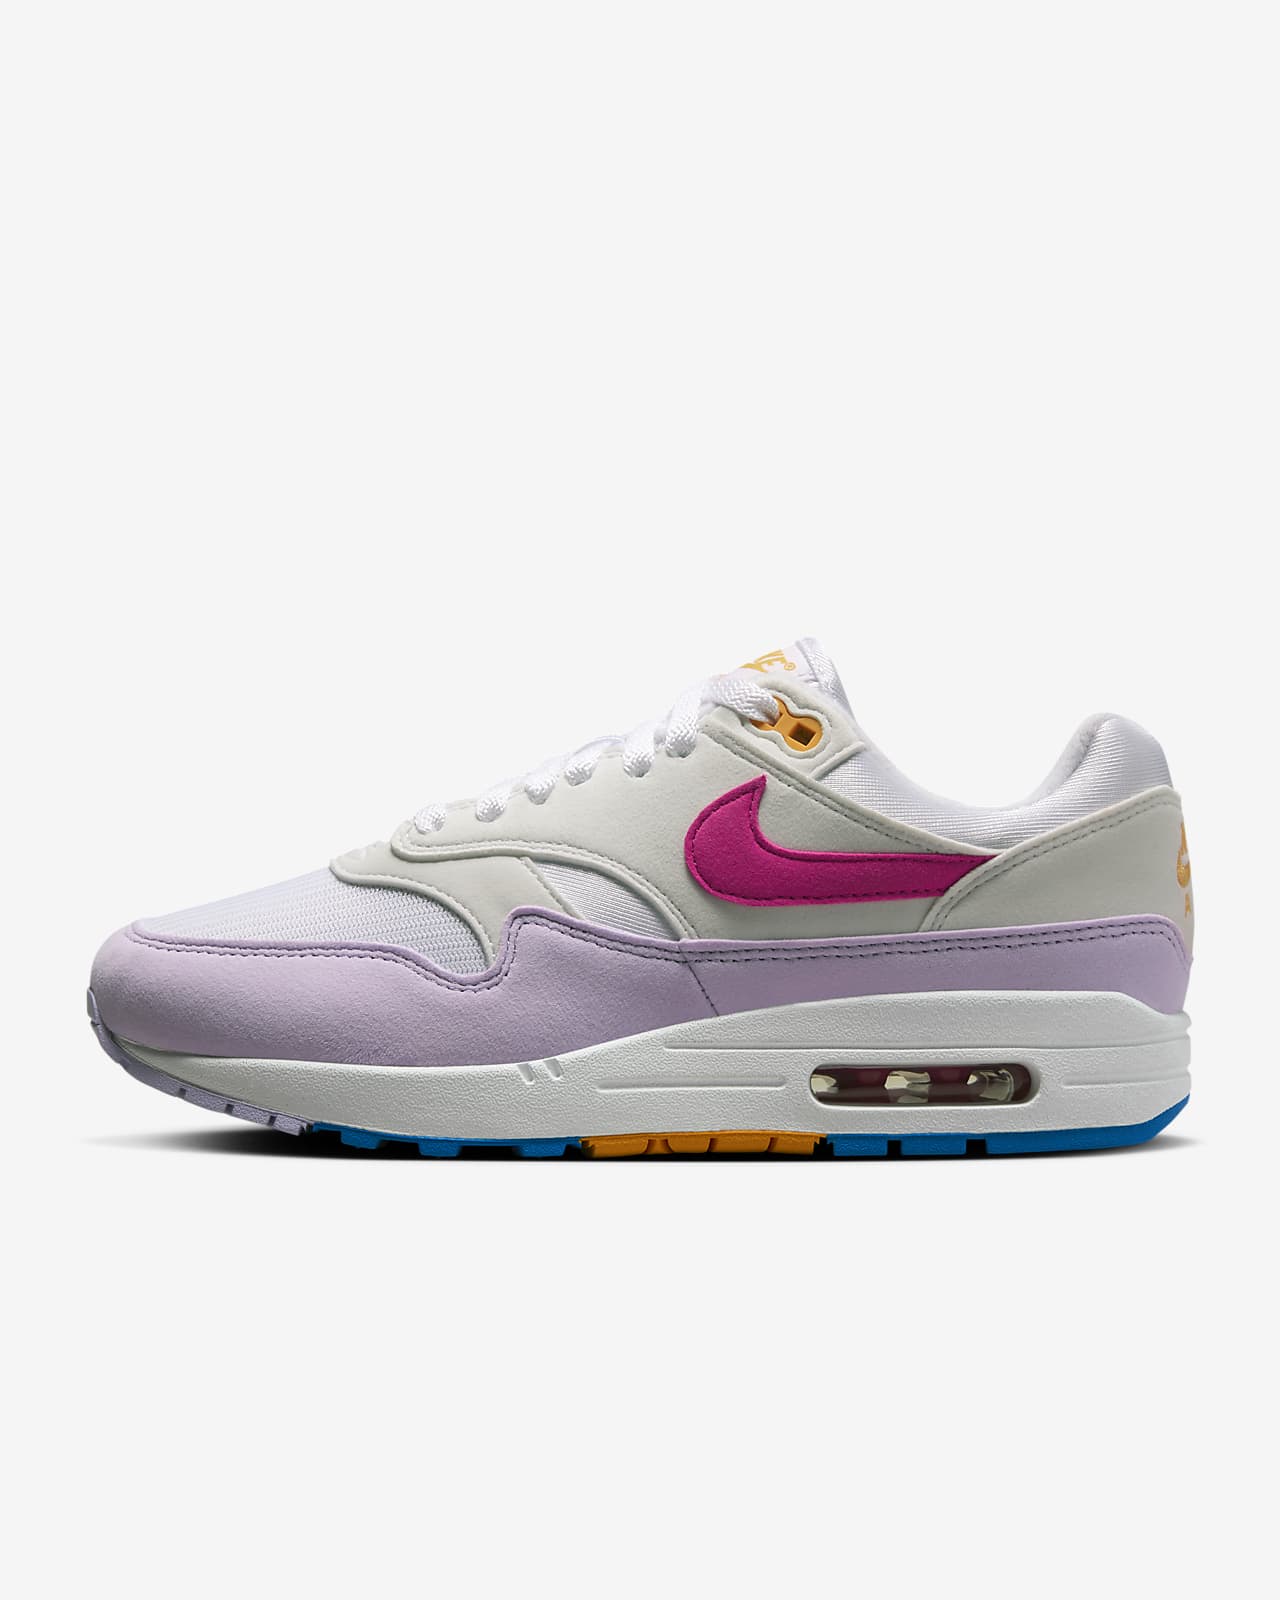 Nike Air Max 1 Tokyo City Collection (Women's)